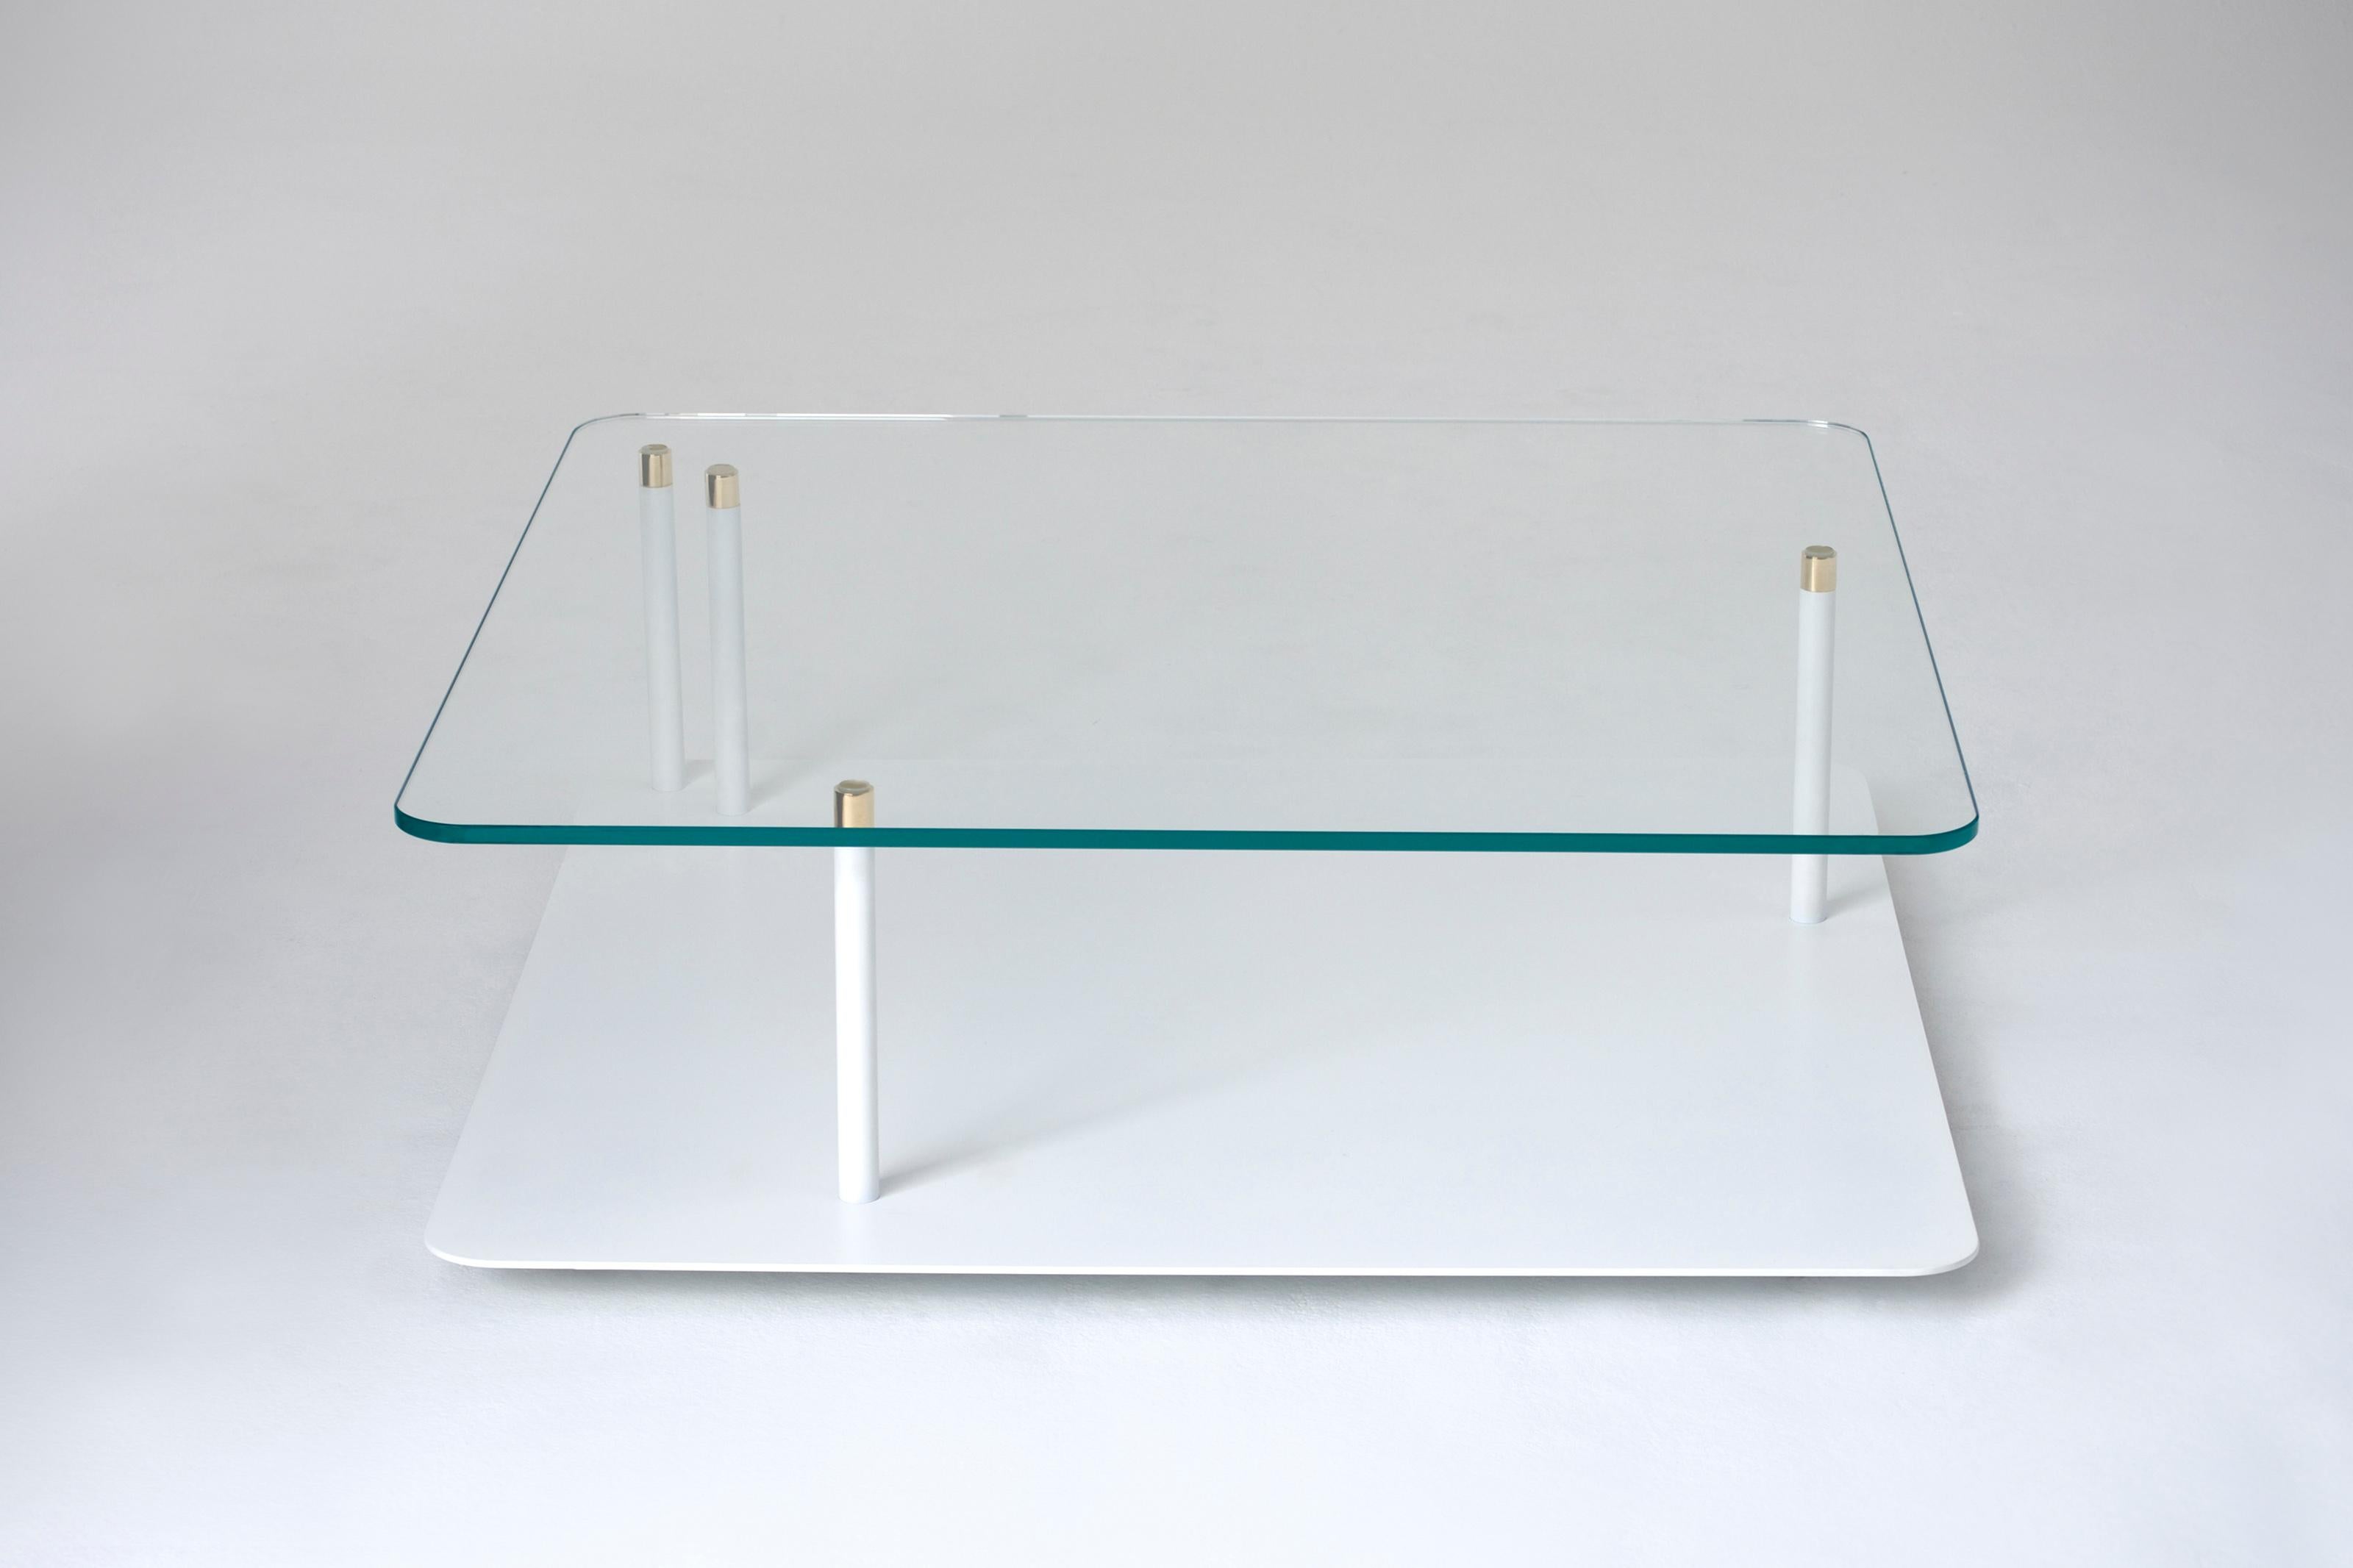 Points of Interest Square Coffee Table by Phase Design
Dimensions: D 96.5 x W 96.5 x H 29.2 cm. 
Materials: Powder-coated steel, glass and brass.

Powder coated steel base with solid brass tips and available with starphire glass top. Powder coat